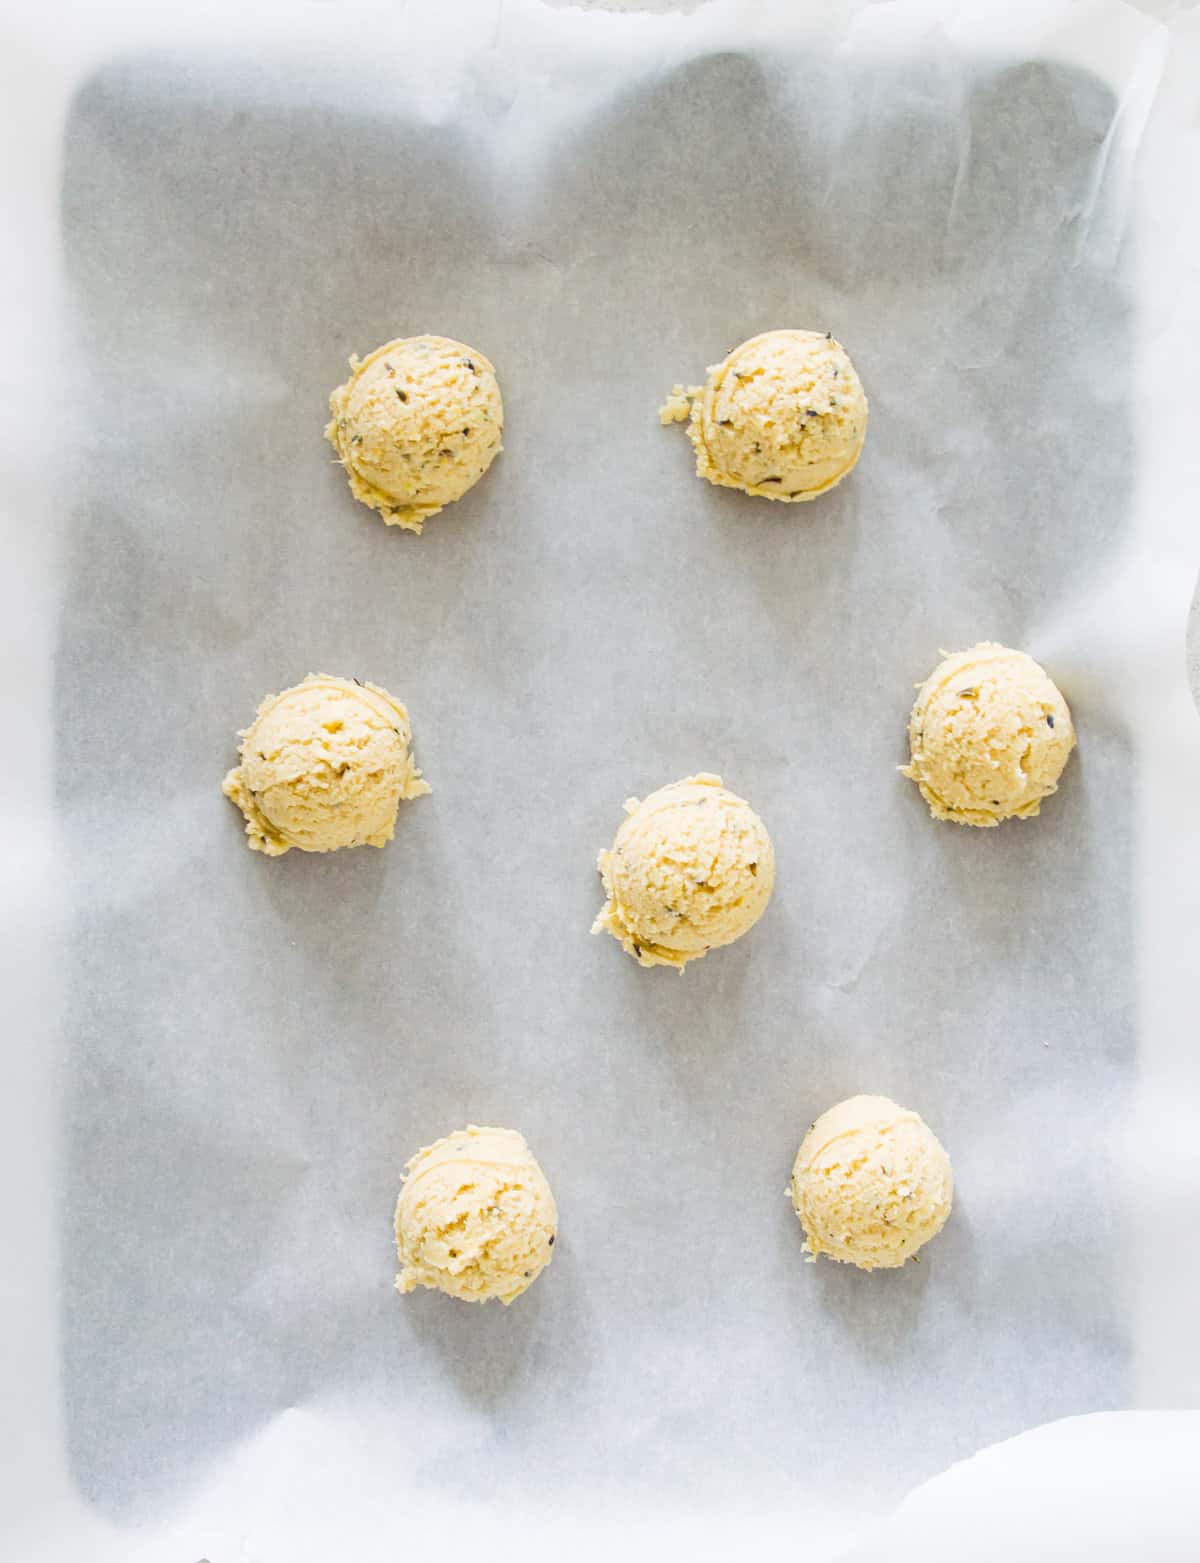 Scoops of raw cookie dough on a baking sheet lined with parchment paper.